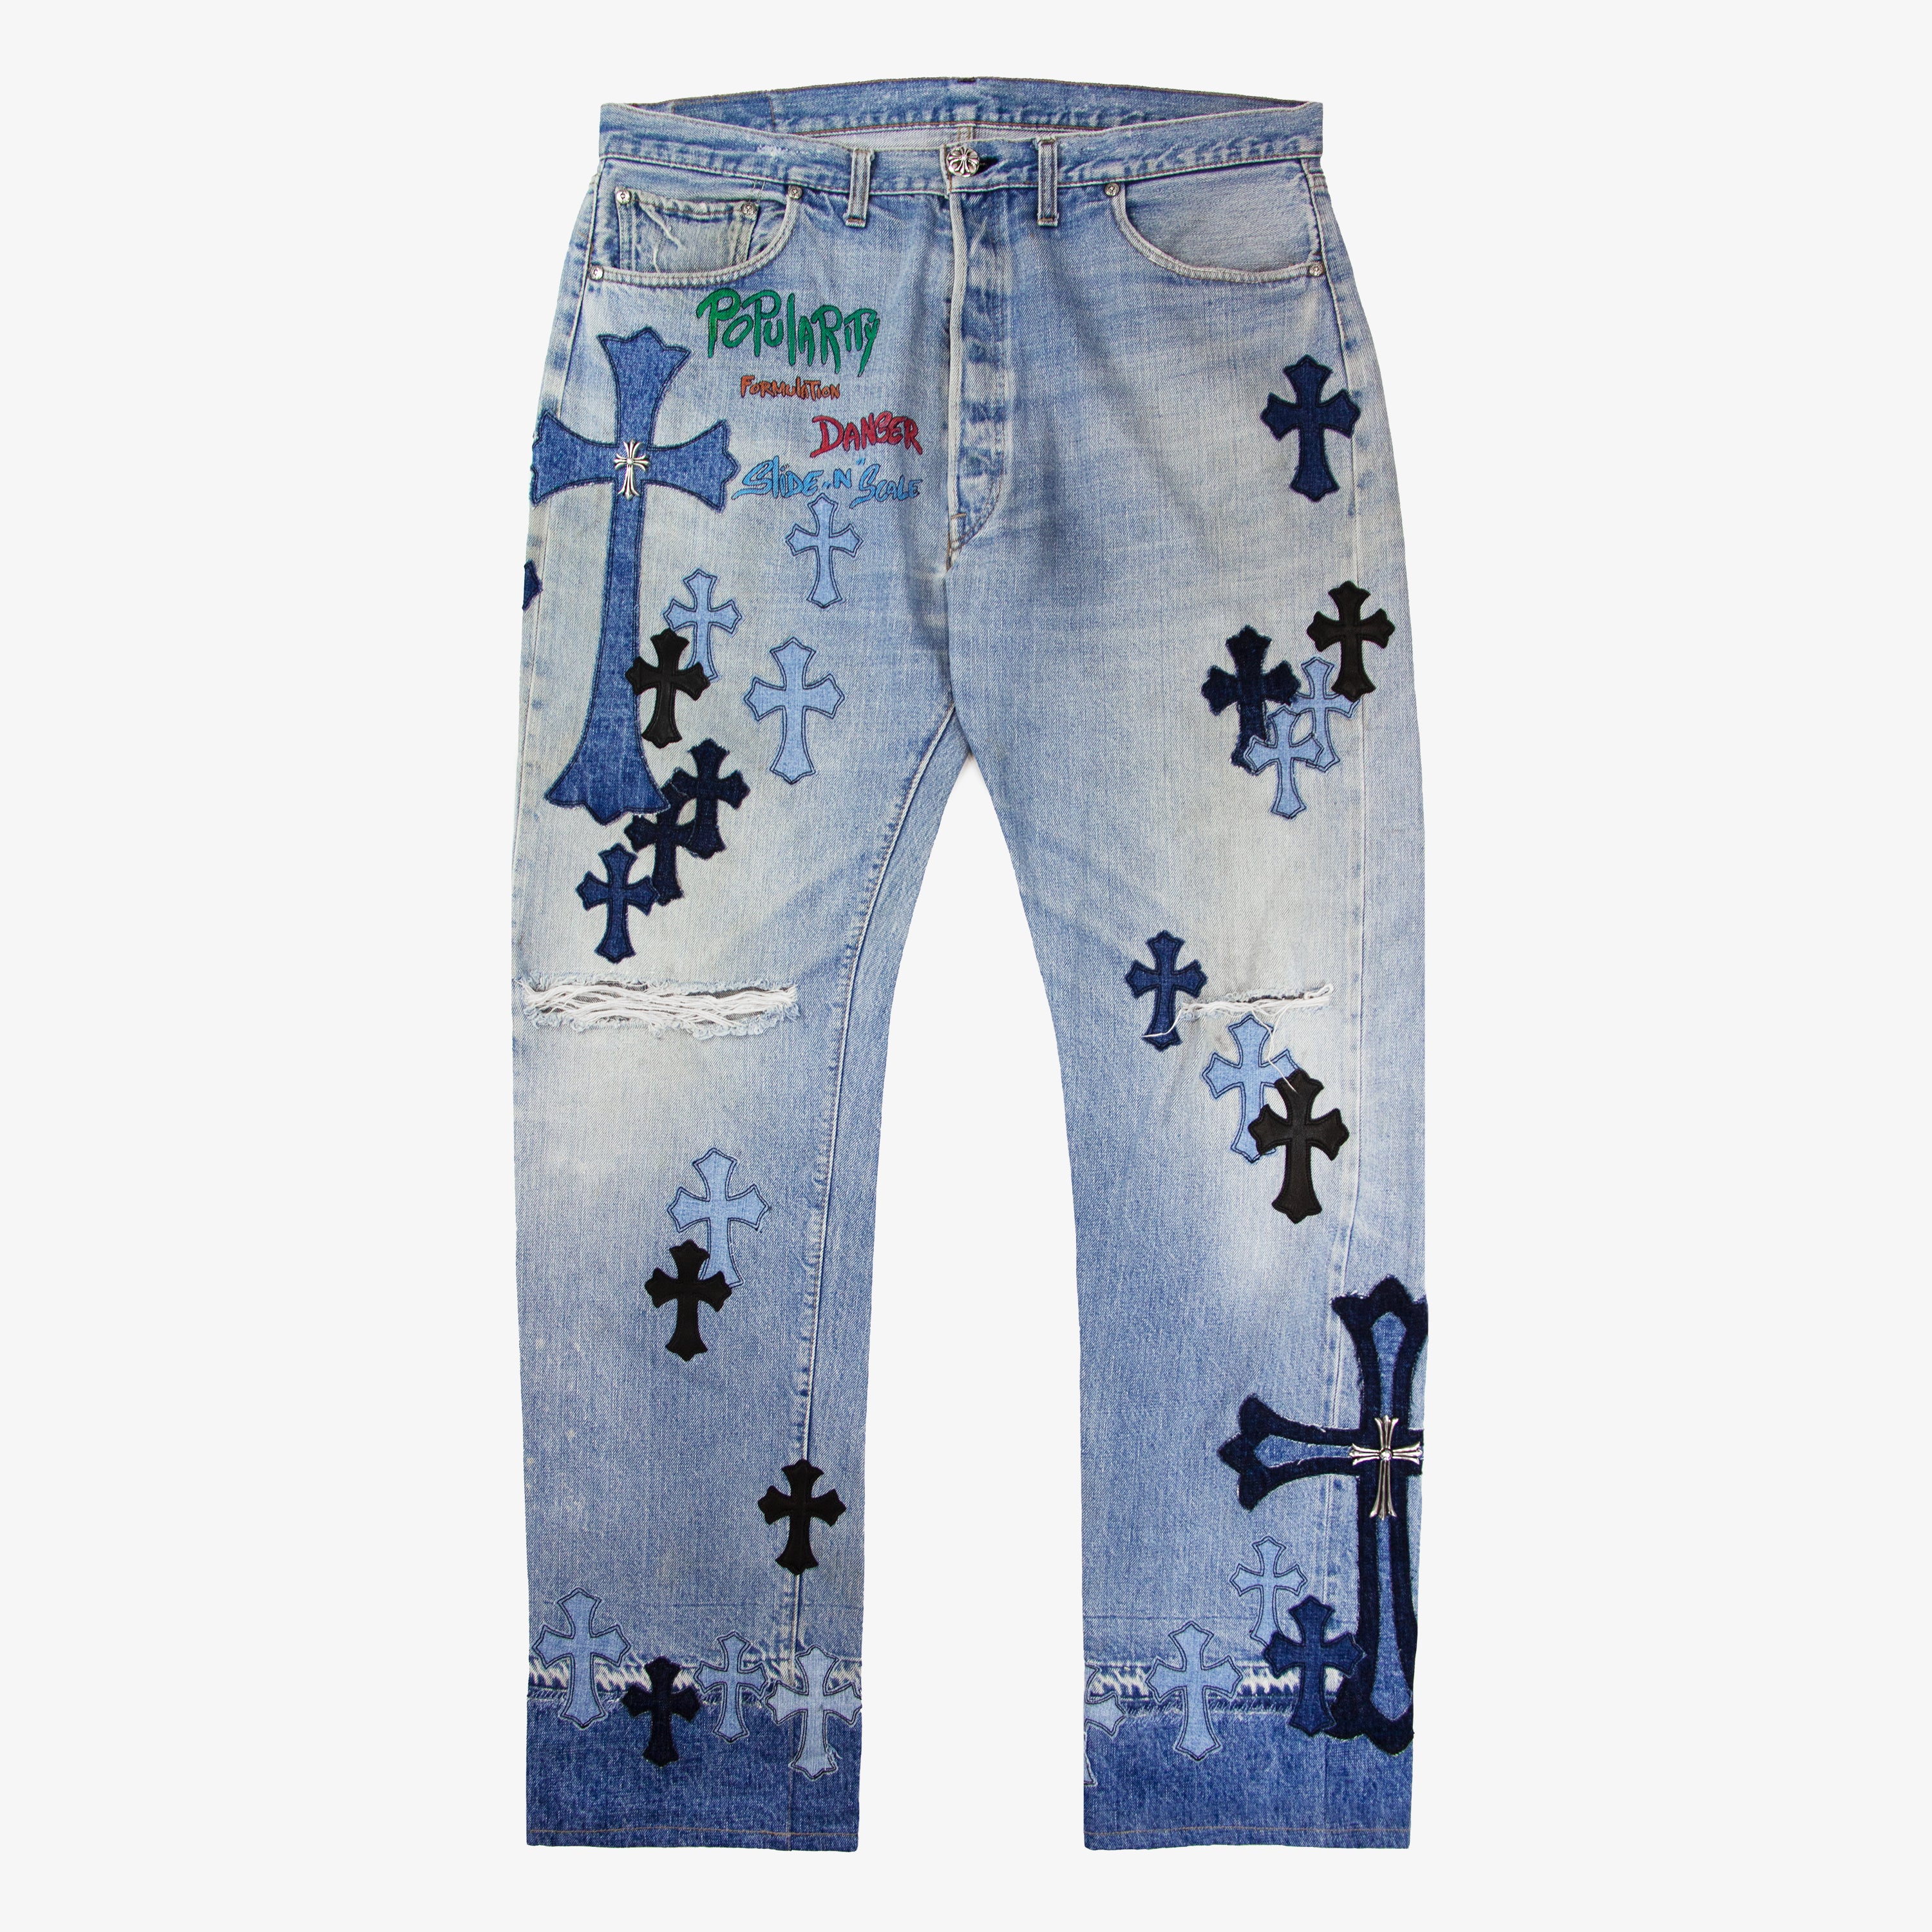 chrome heart patches on jeans｜TikTok Search